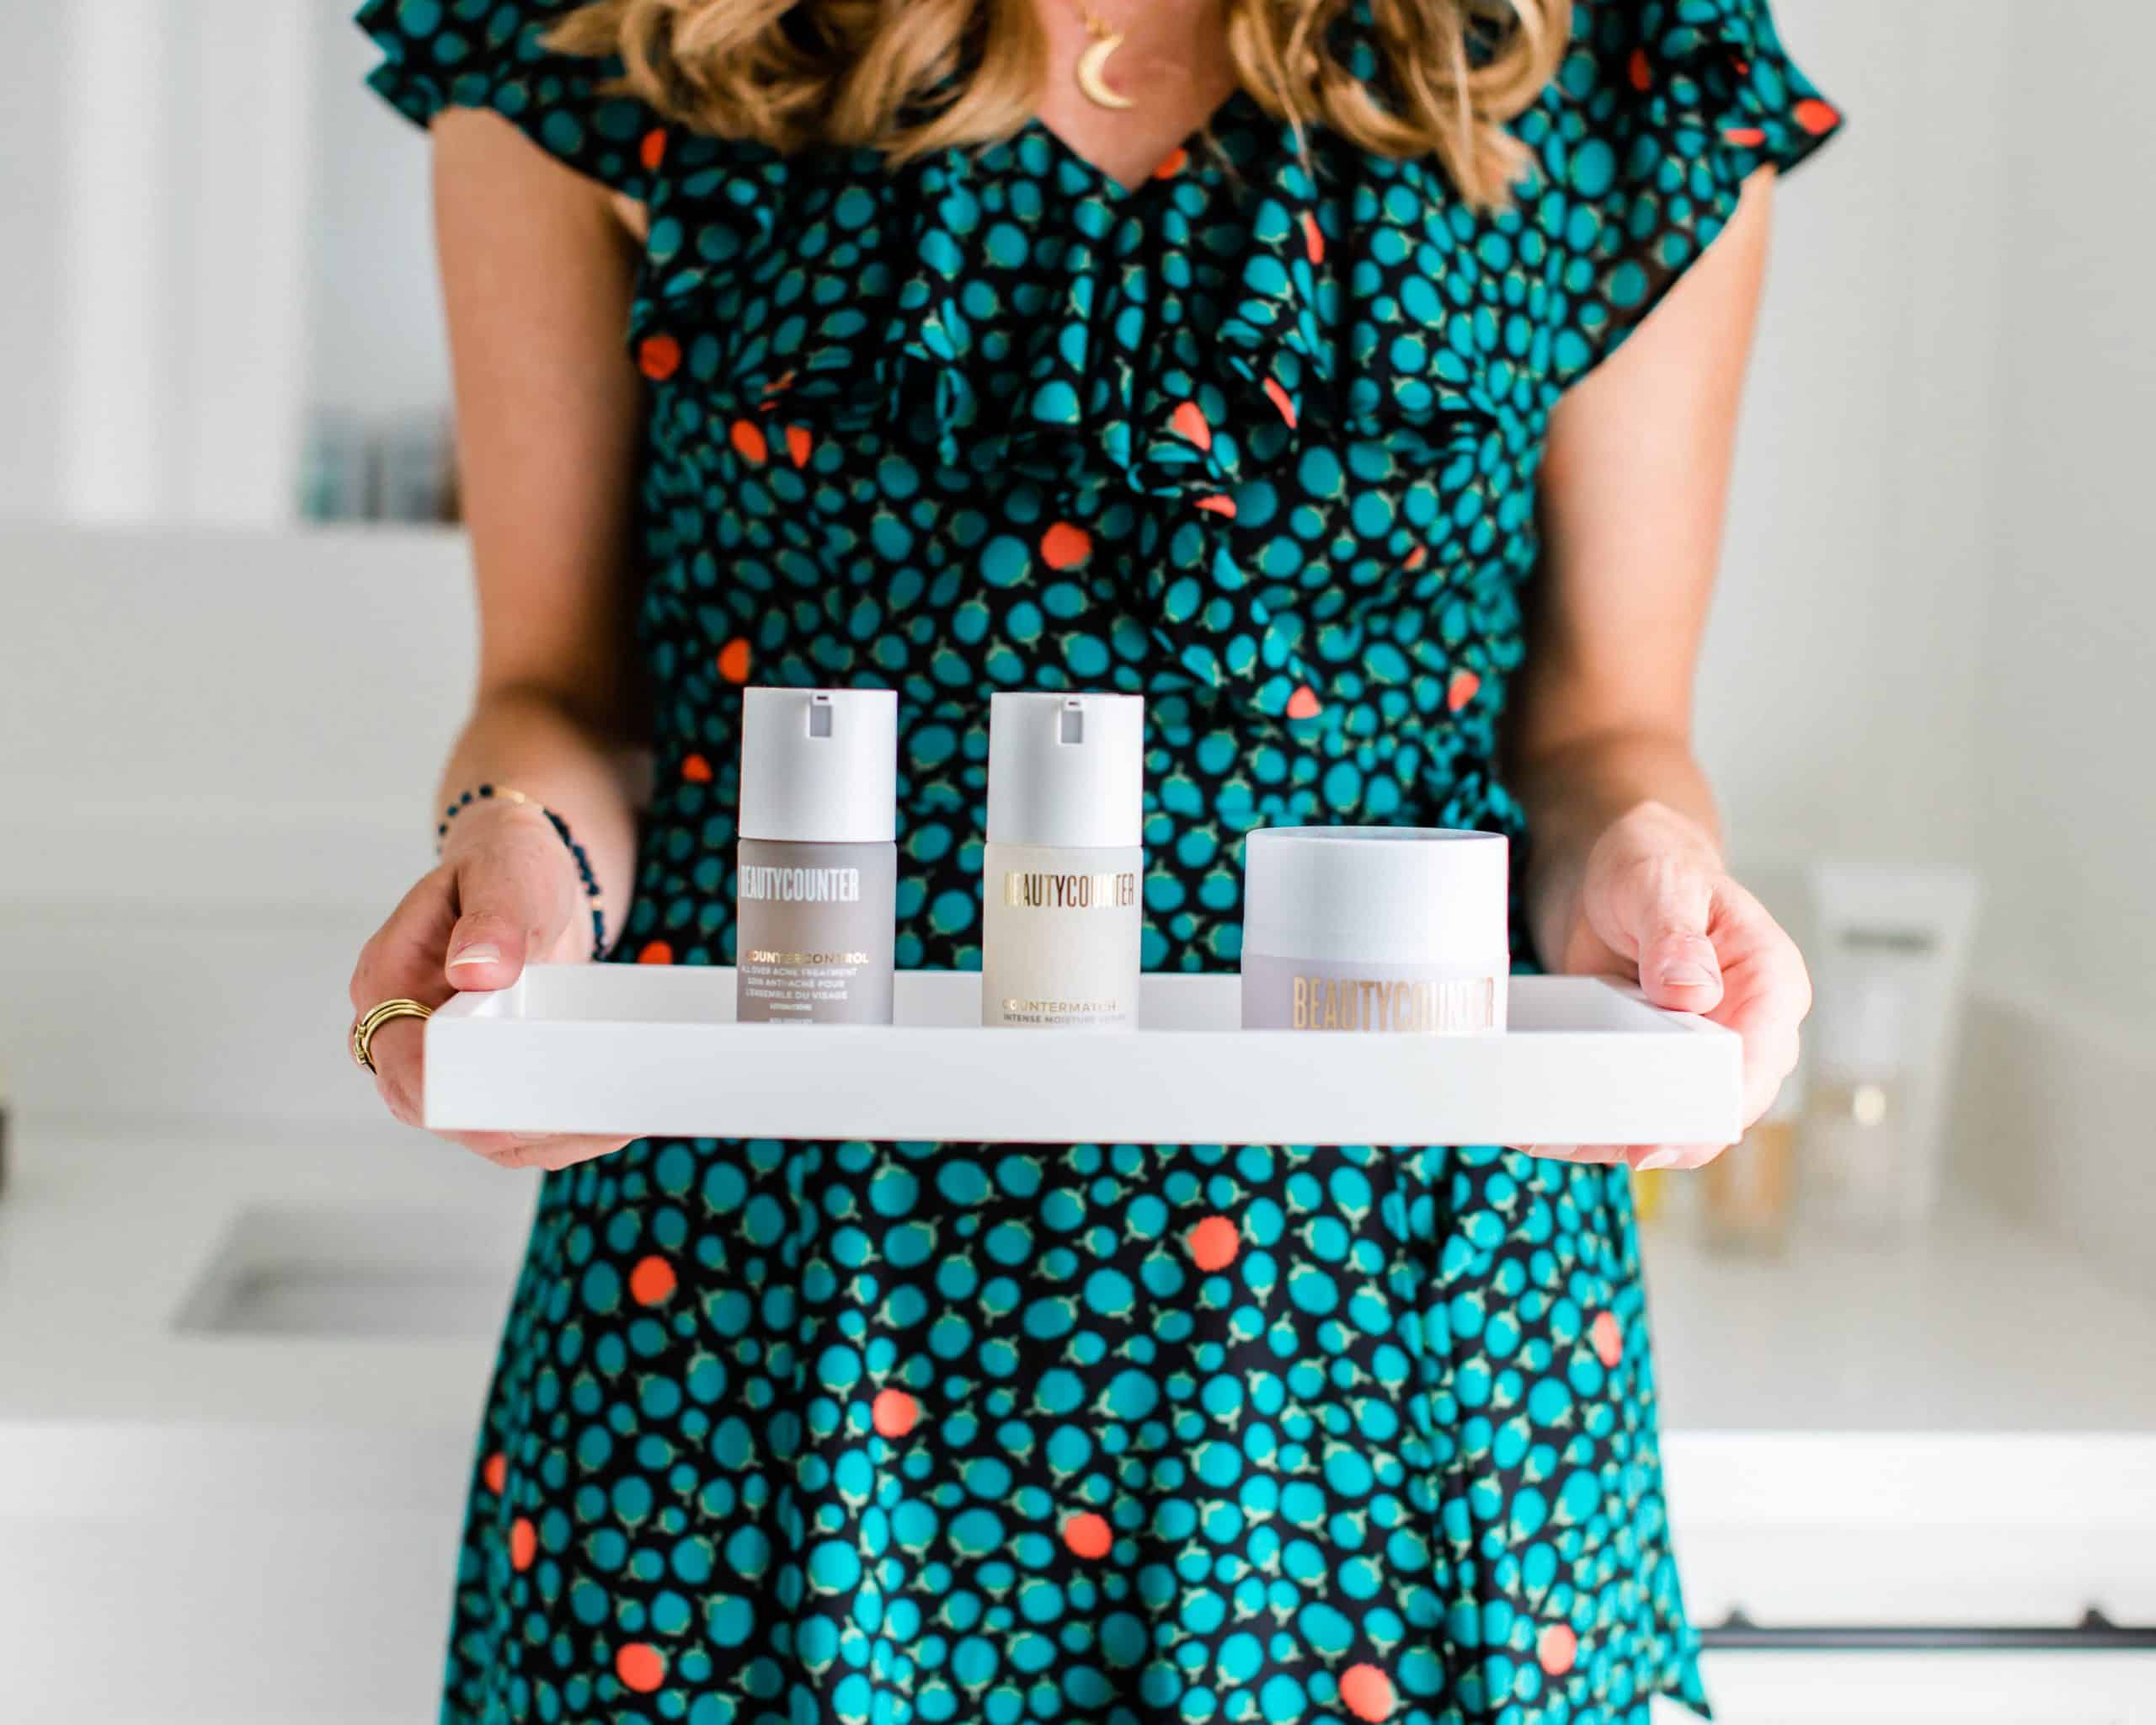 A girl holding a tray filled with three Beautycounter products.